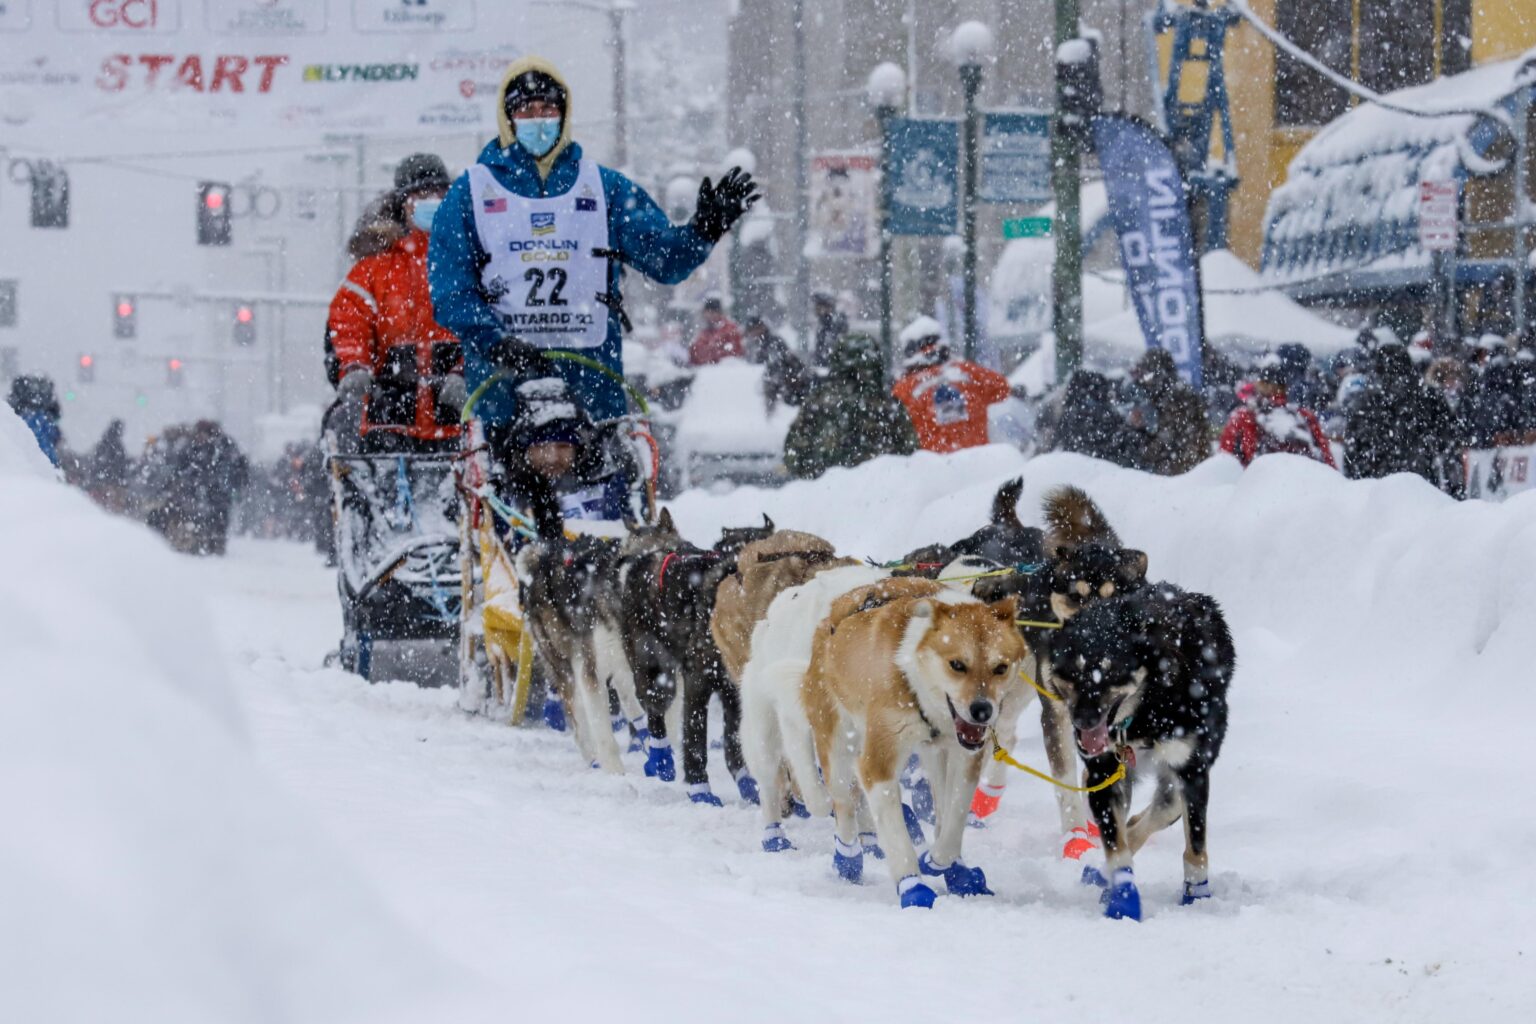 Our favorite 30 photos from the snowy 2022 Iditarod ceremonial start